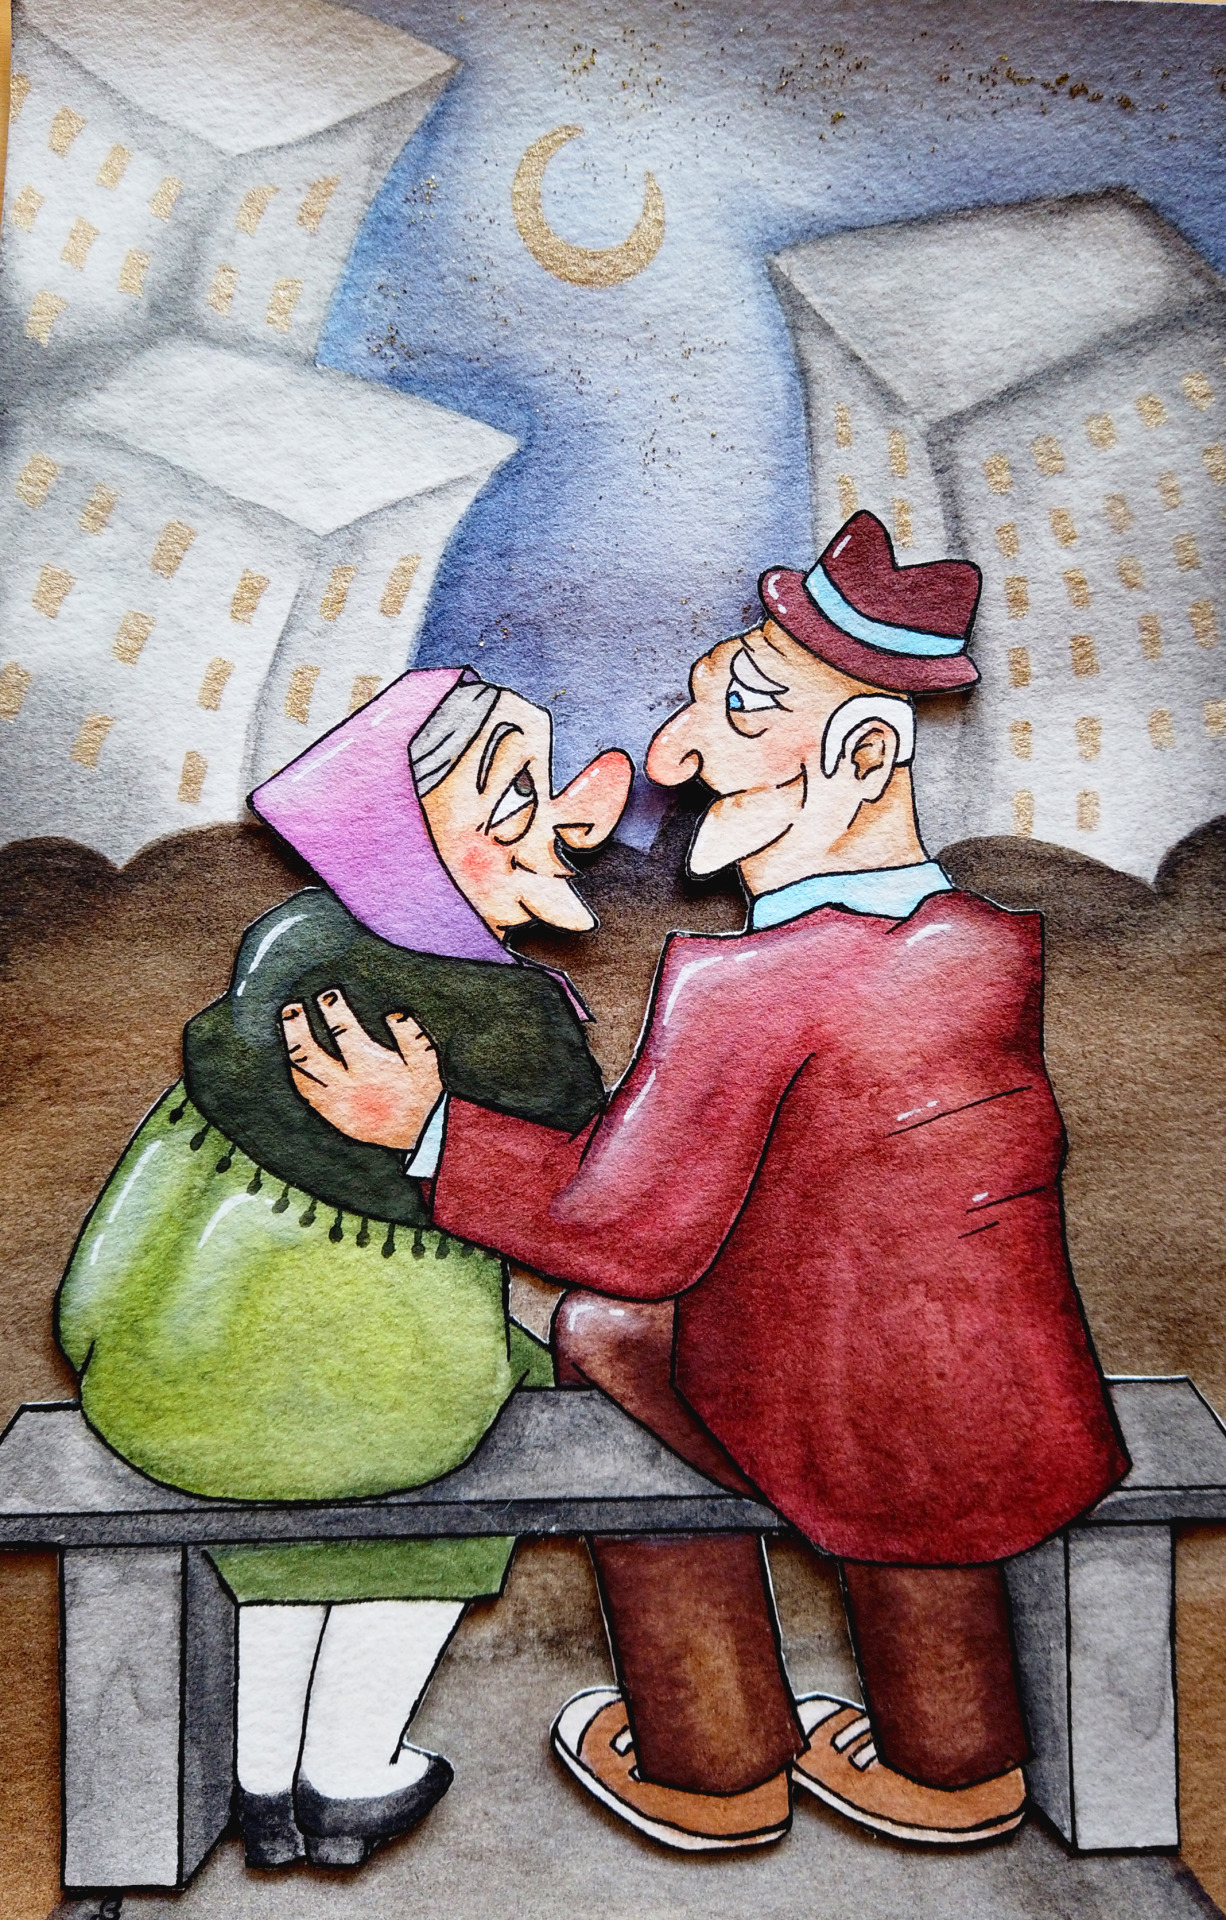 Watercolor drawing #watercolour art#illustration#drawing#love#old#couple#newyork